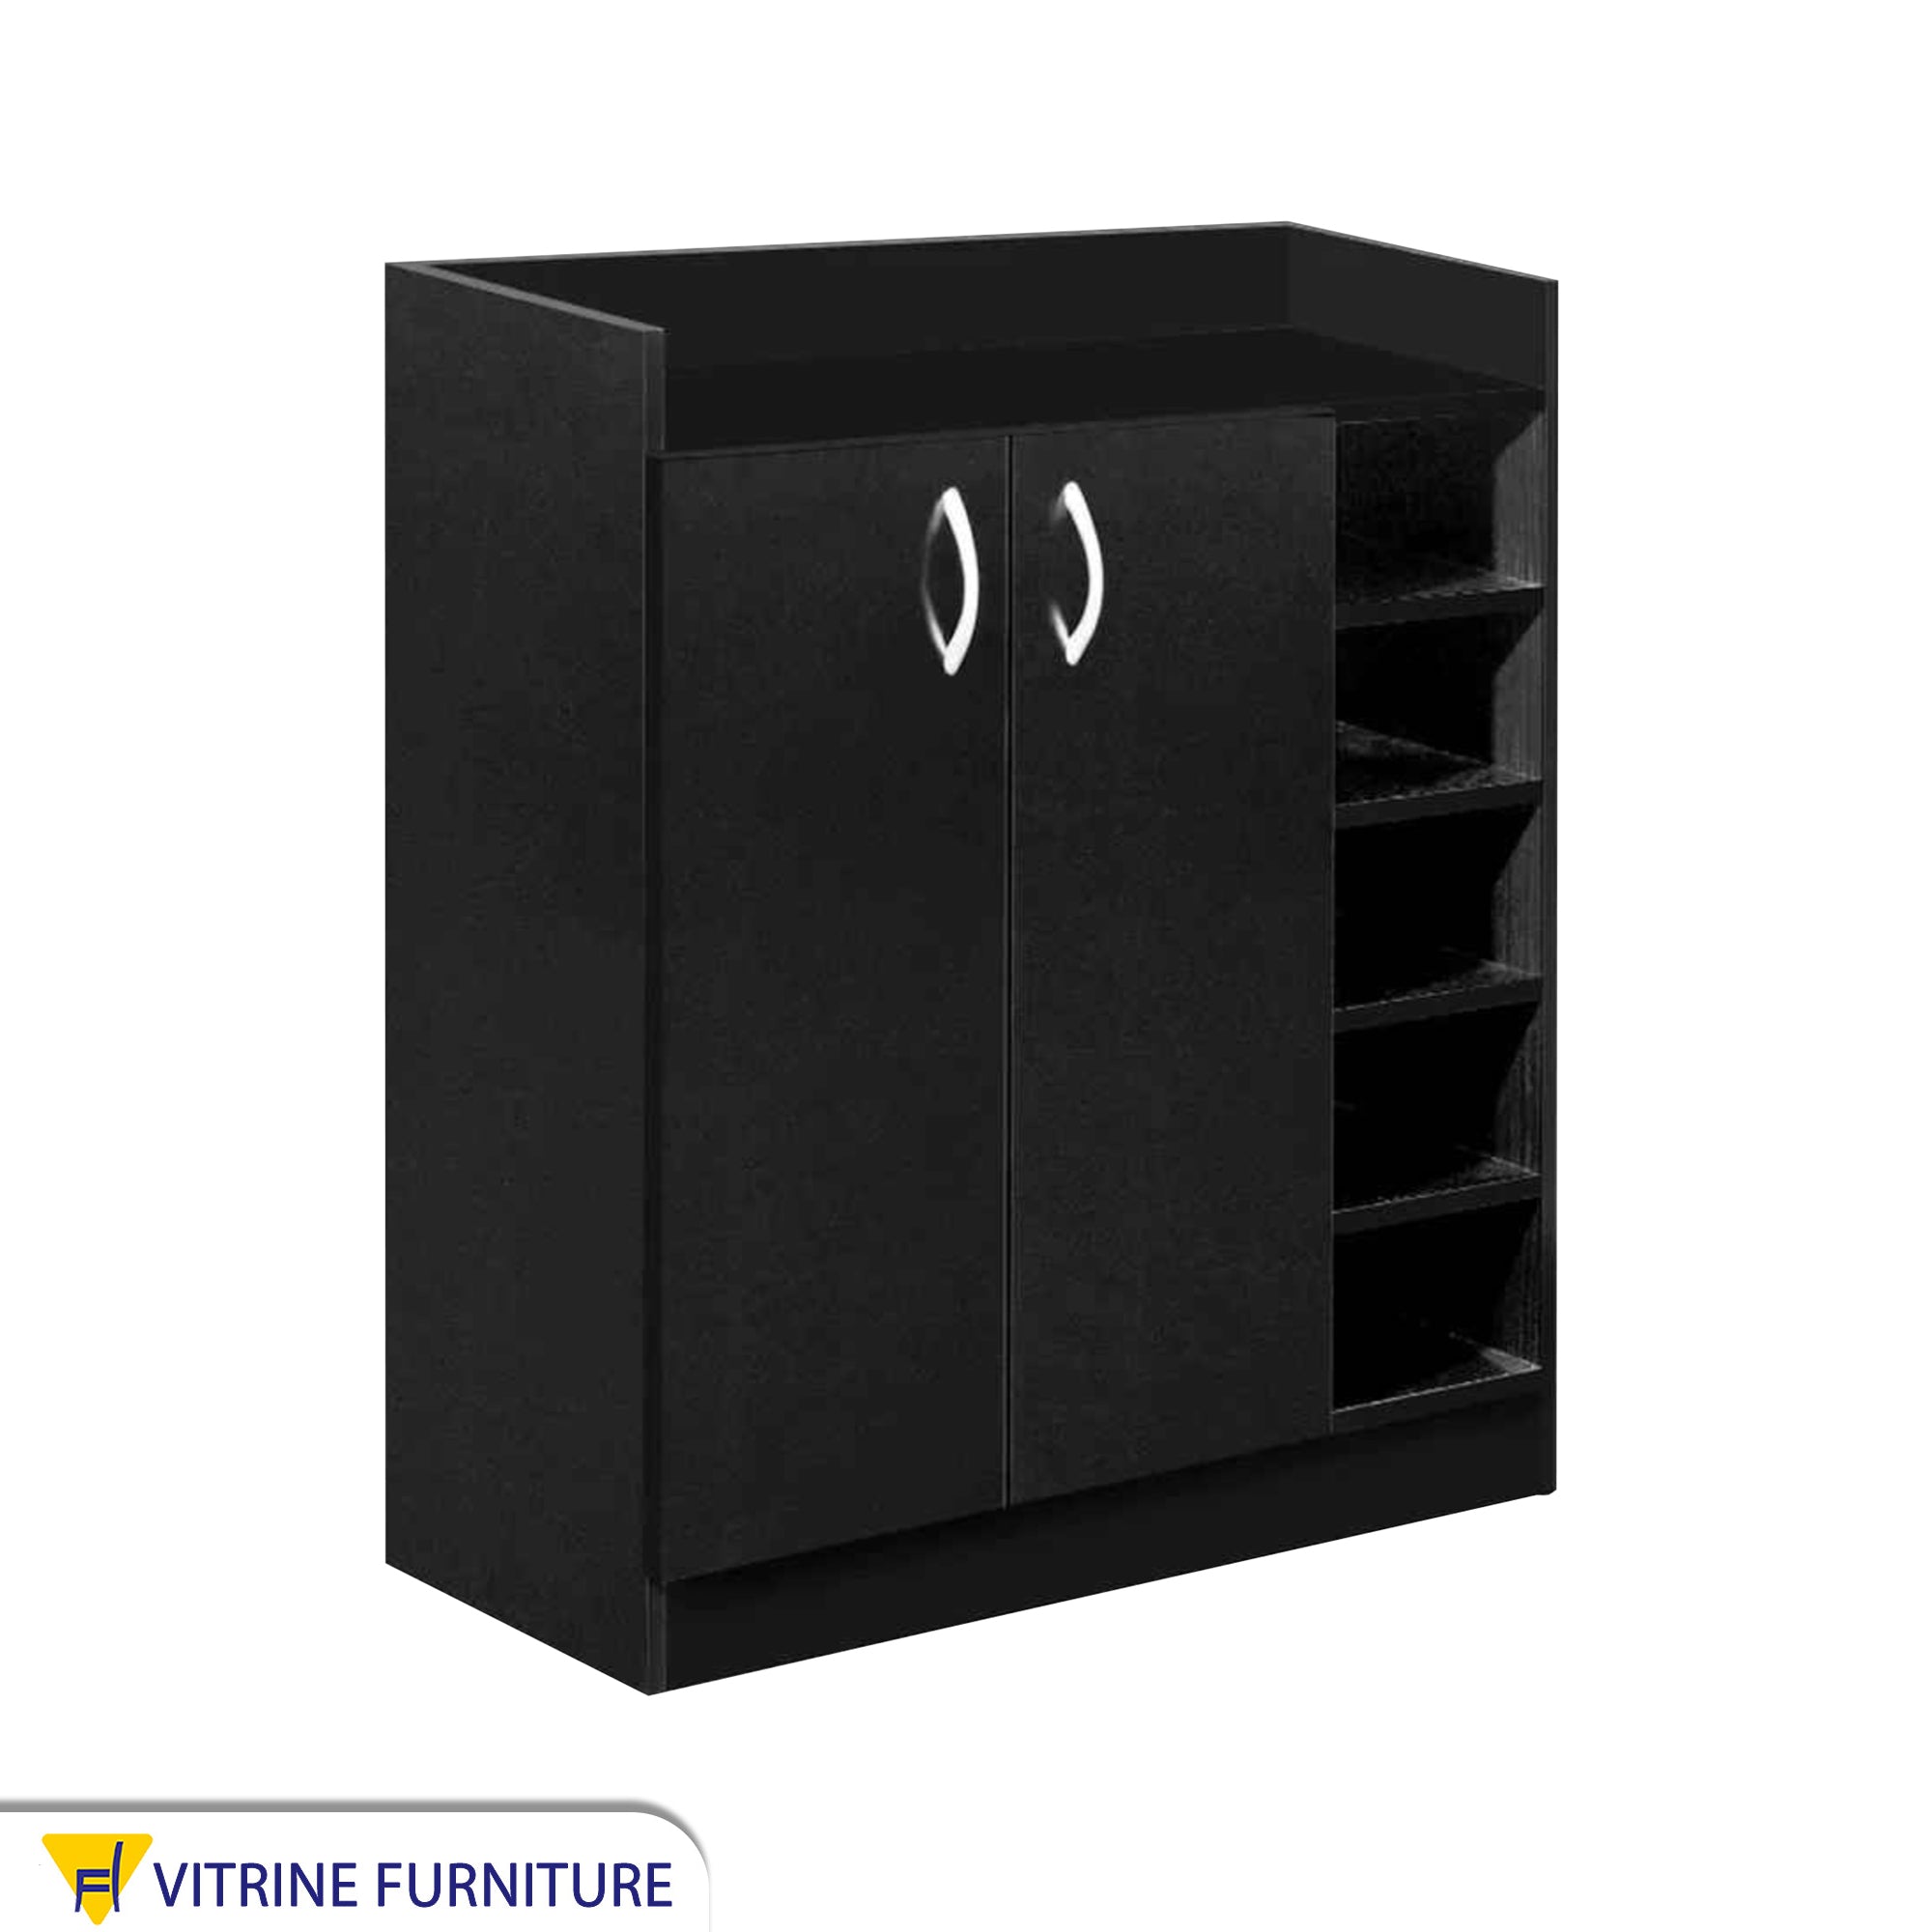 Black Shoe rack with decorative shelves attached